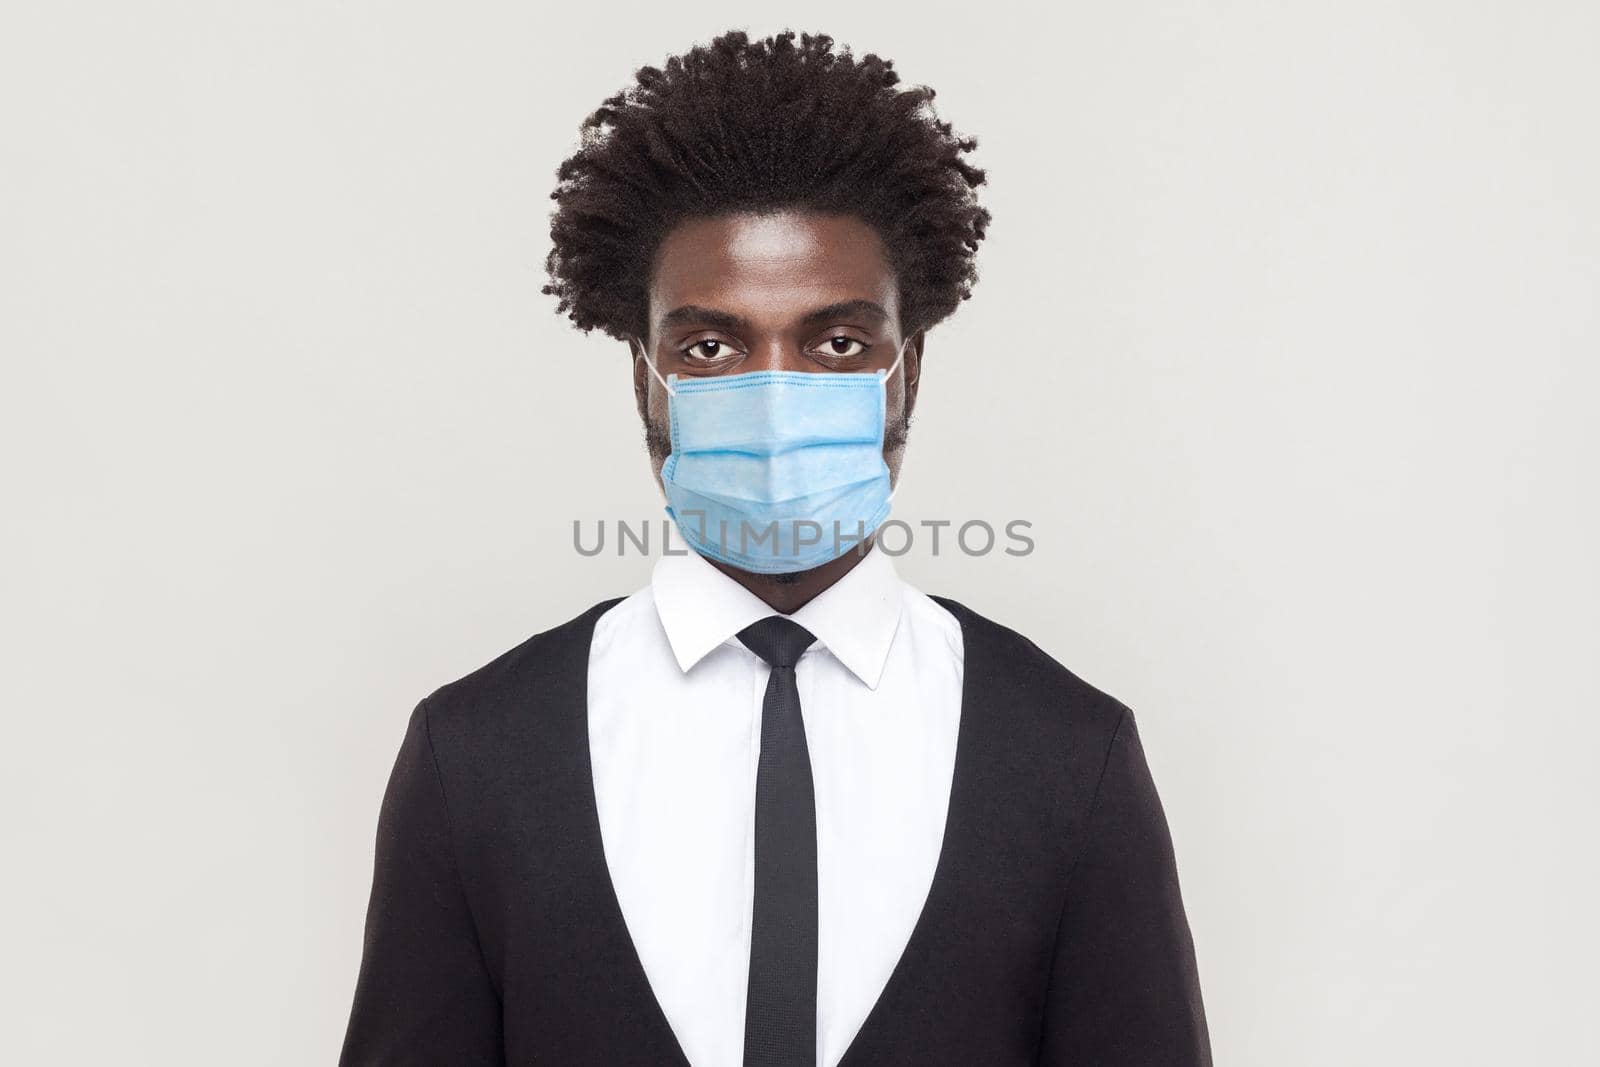 Protection against contagious disease, coronavirus. Man wearing hygienic mask to prevent infection, airborne respiratory illness such as flu, Covid-19. indoor studio shot isolated on gray background